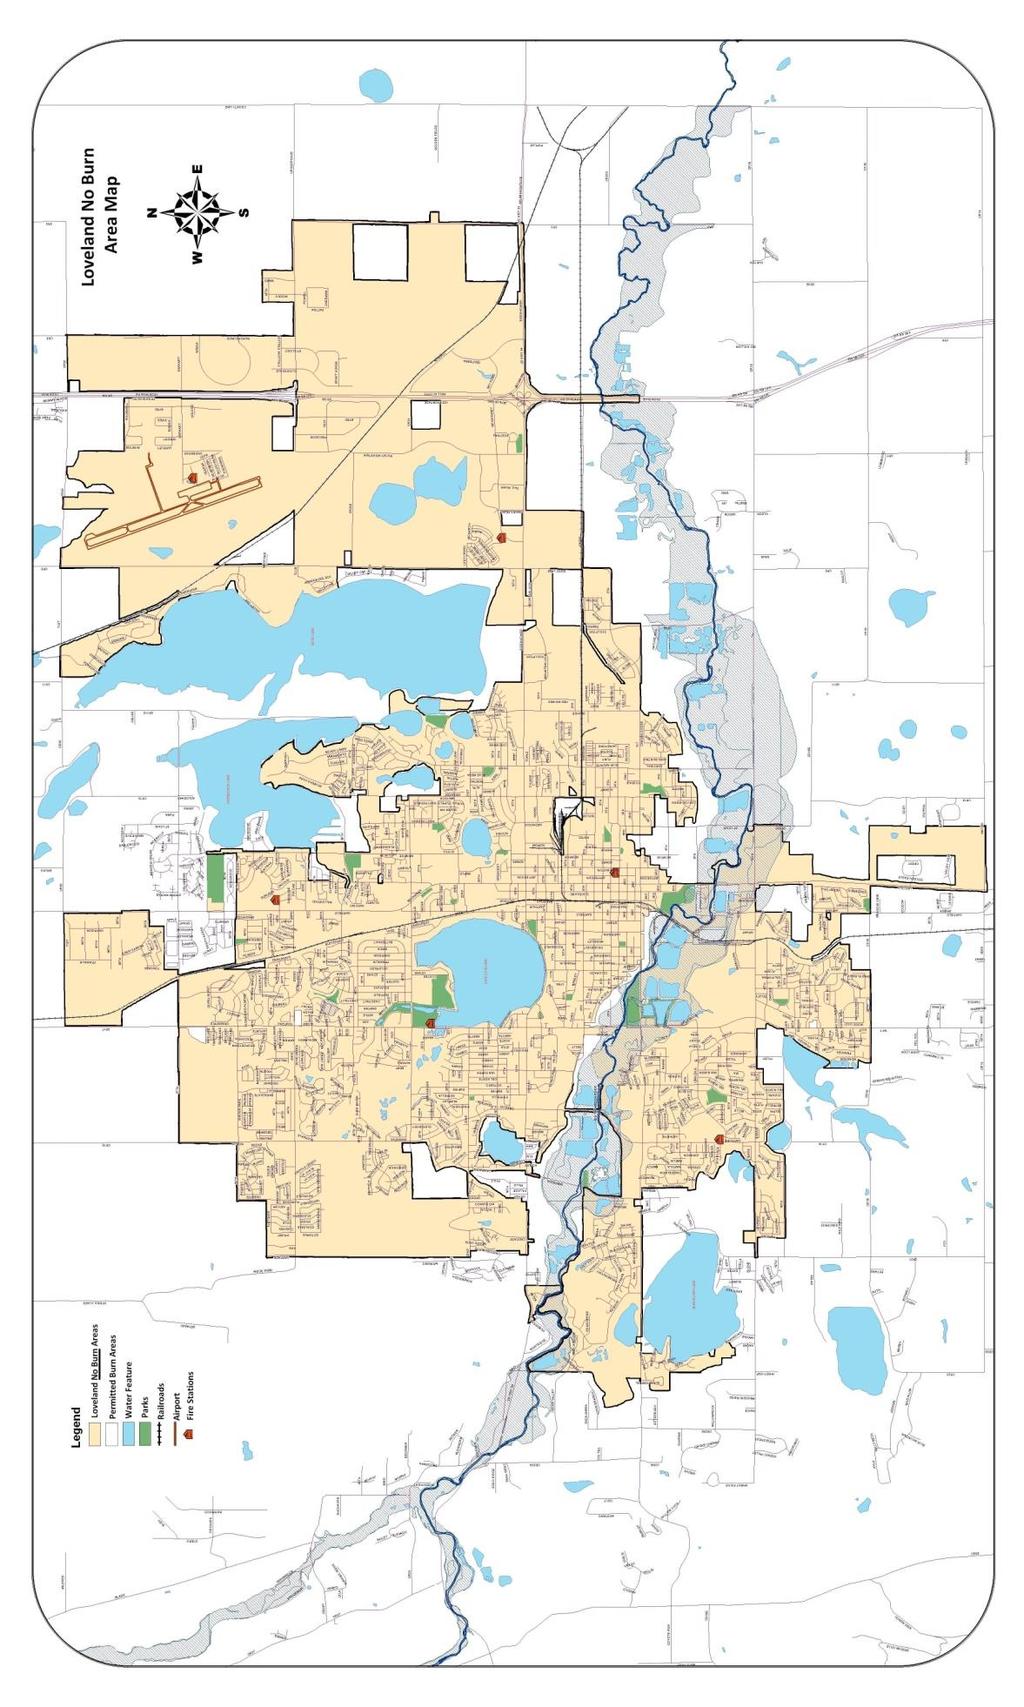 Loveland NO BURN Locations See this map online at: